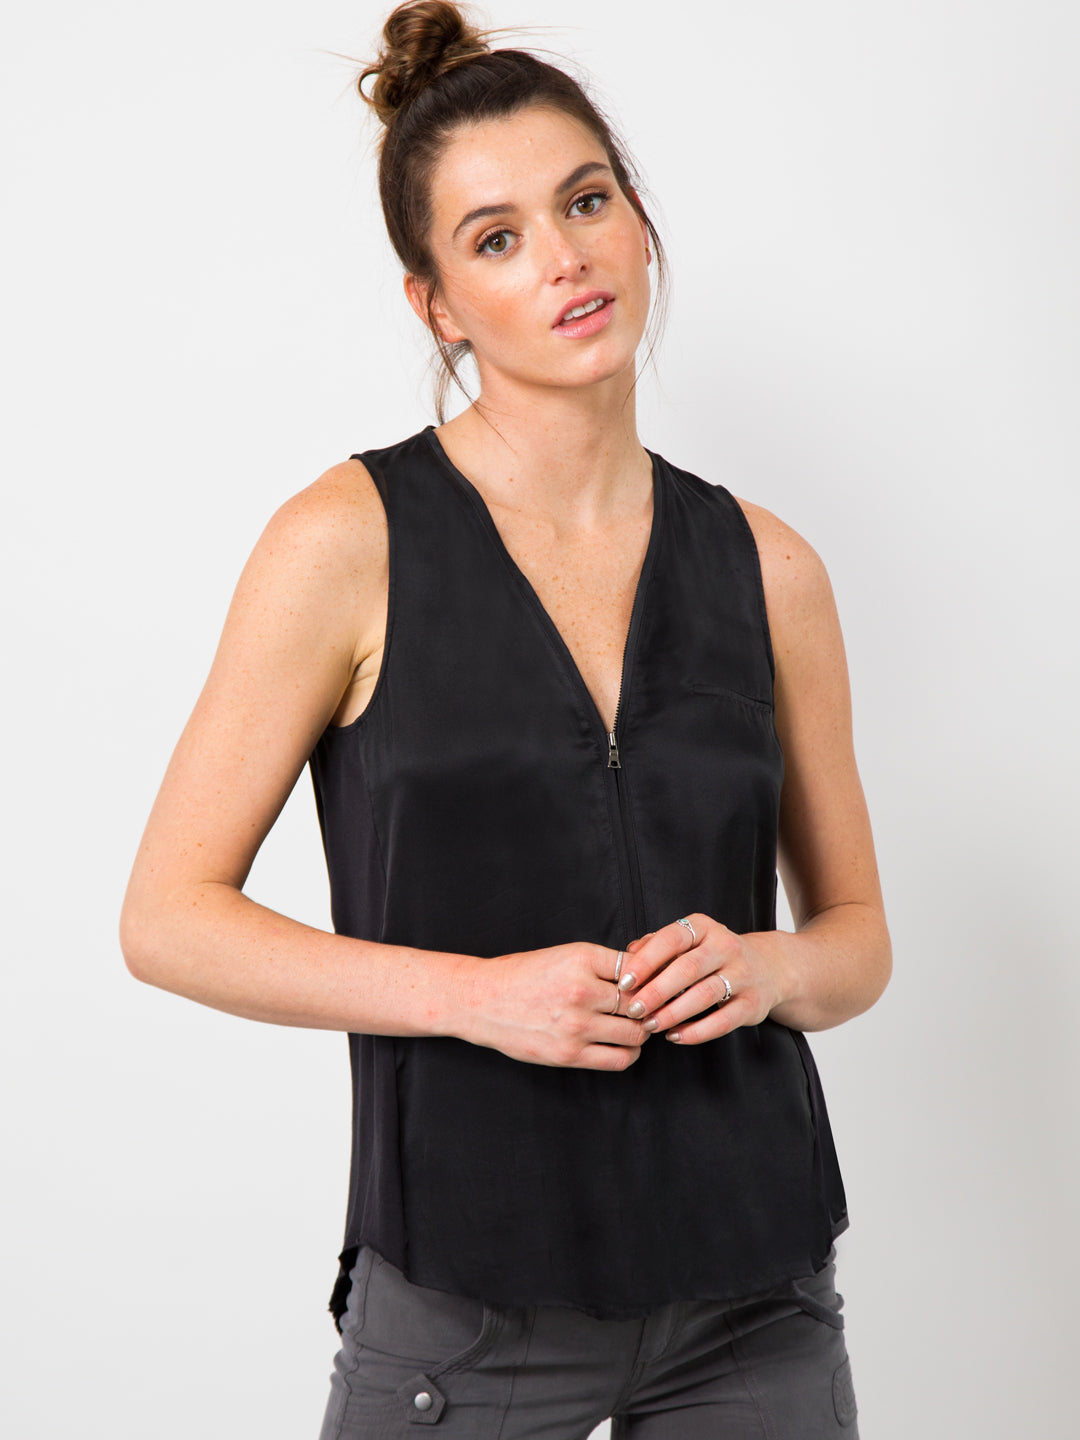 ICONIC go zippy tank luxe - Machine washable pull over silk charmeuse sleeveless top with metal zipper detail and finished with our signature raw edge hems. This is our best selling ICONIC style. 